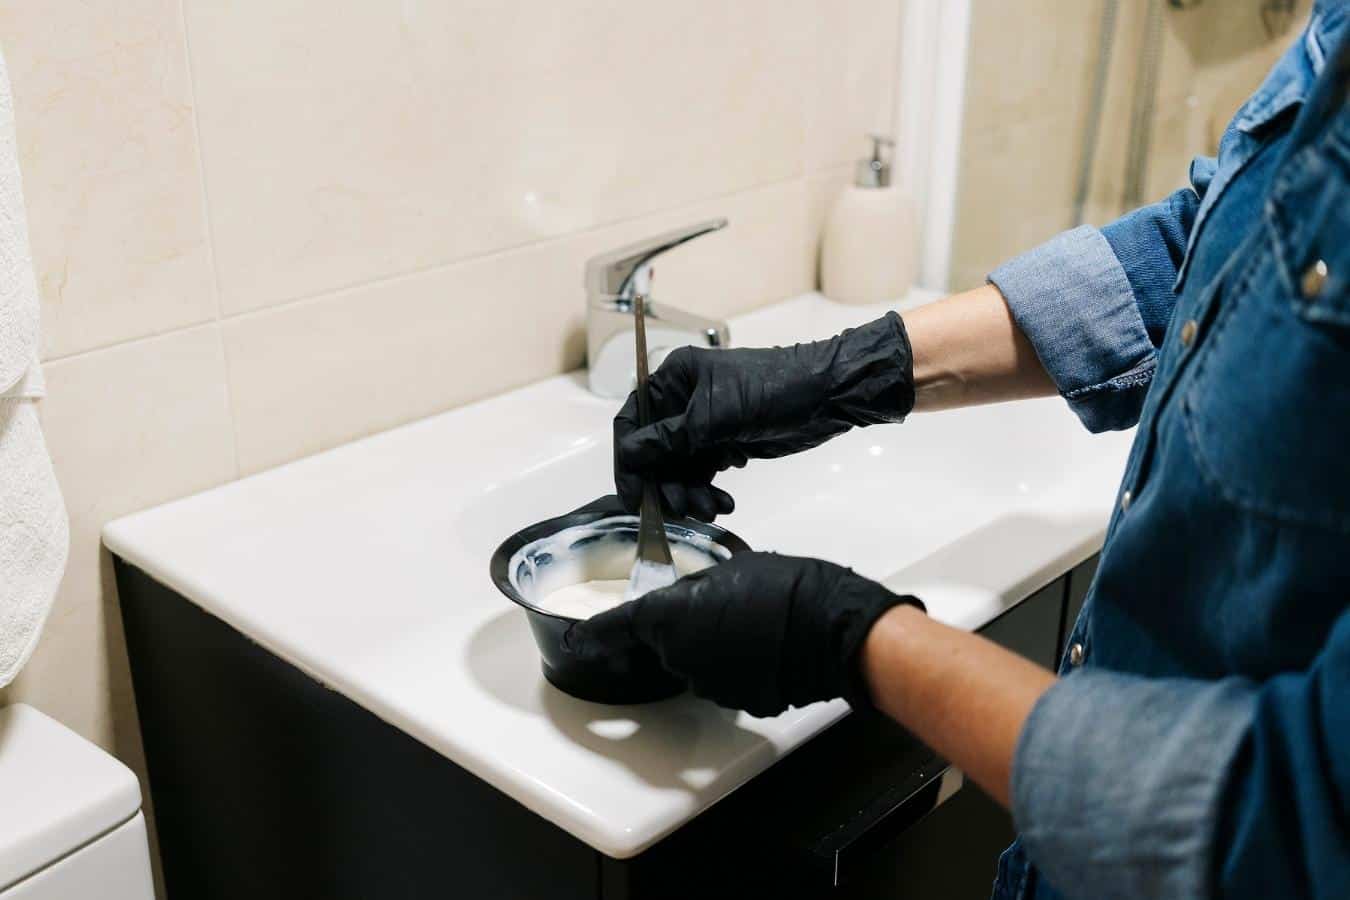 A person mixing hair dye on a sink wearing black gloves